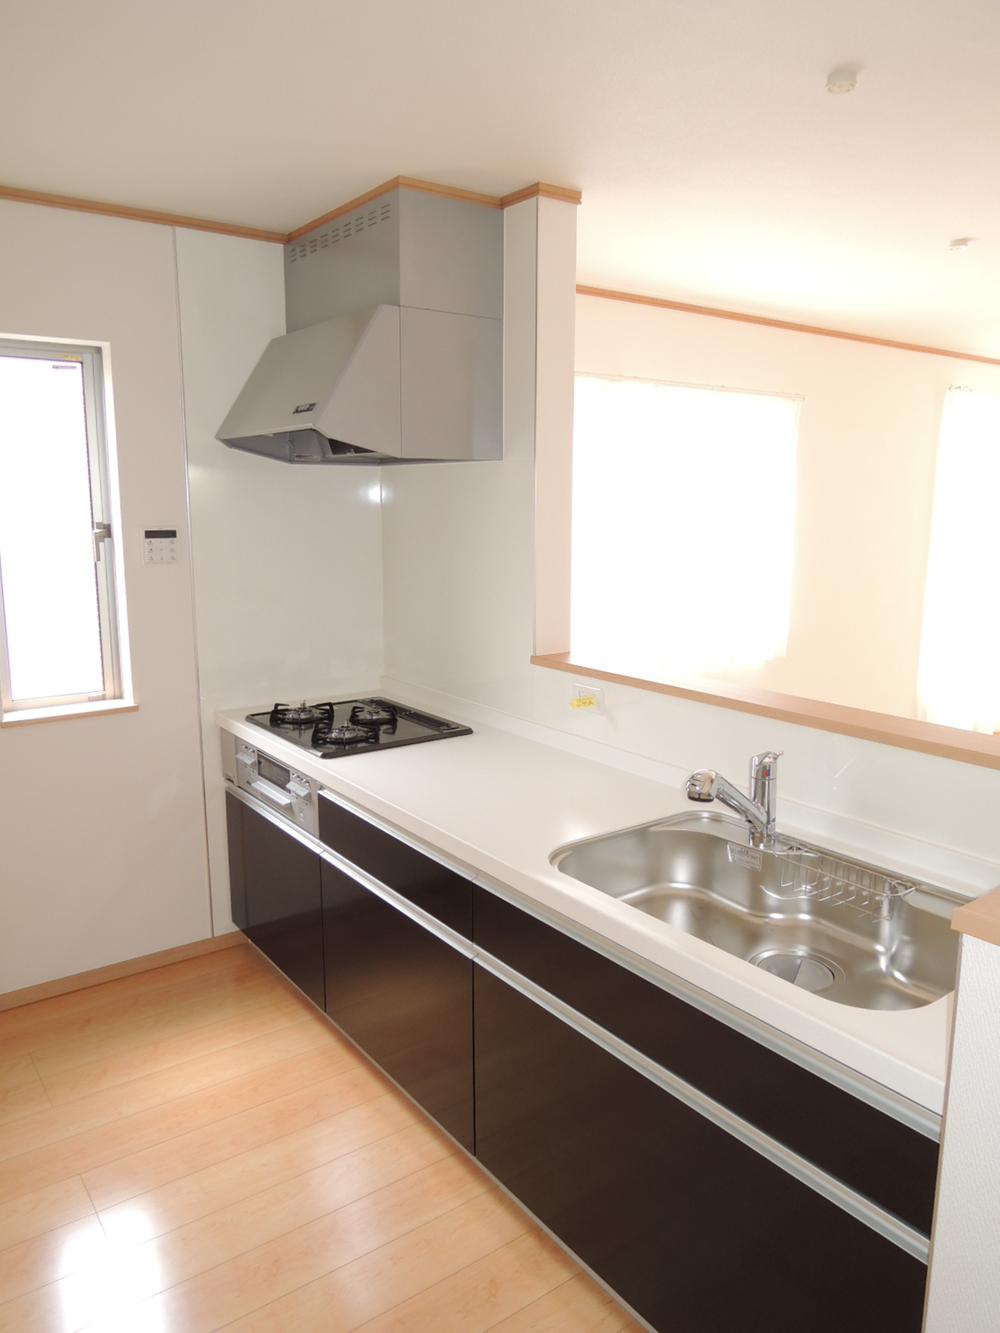 Same specifications photo (kitchen). System Kitchen (seller construction cases)